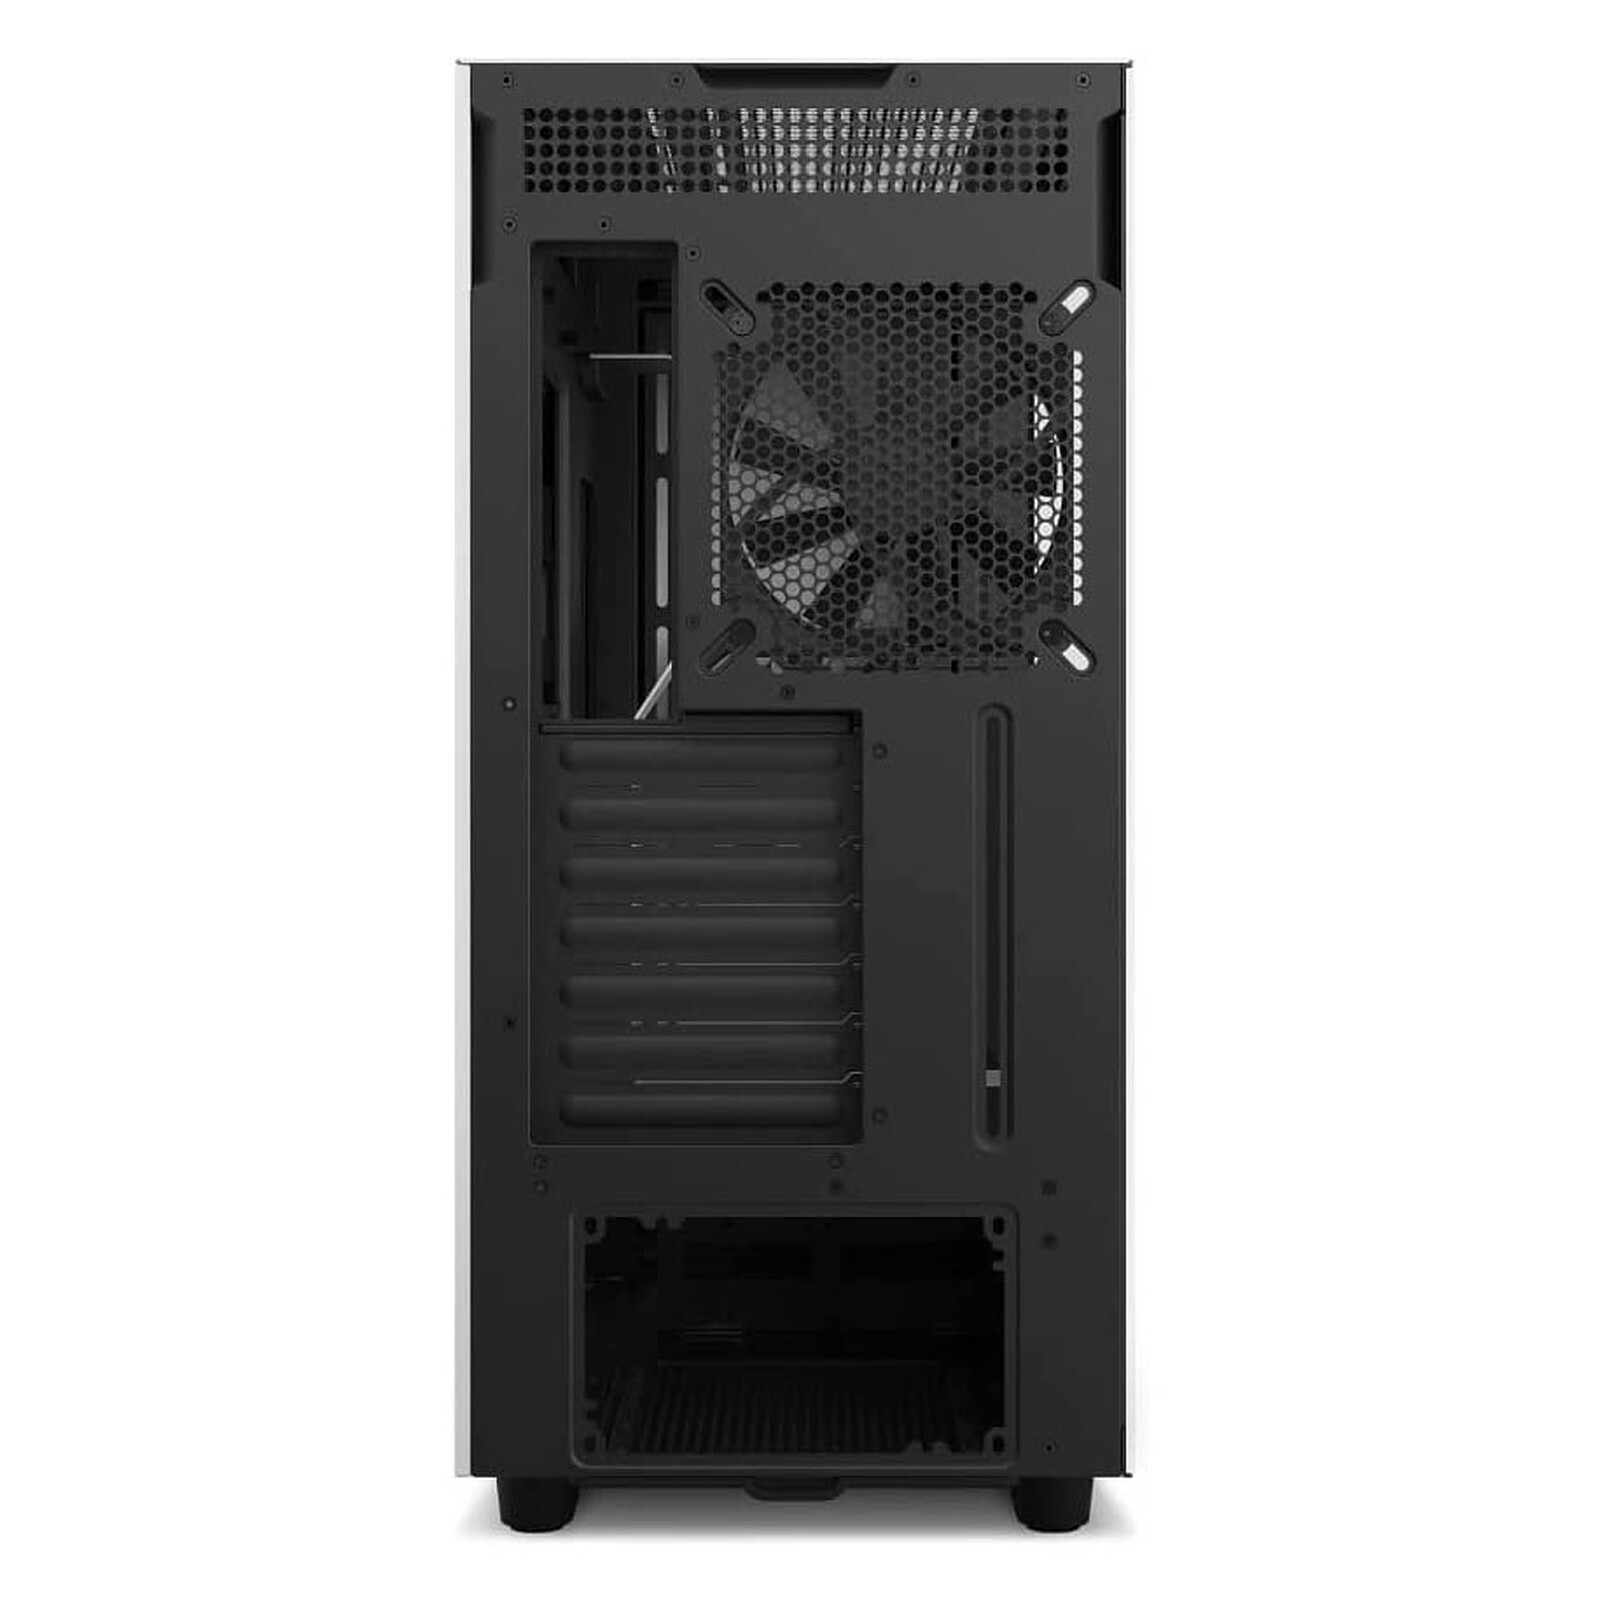 NZXT H7 Black/White - PC cases - LDLC 3-year warranty